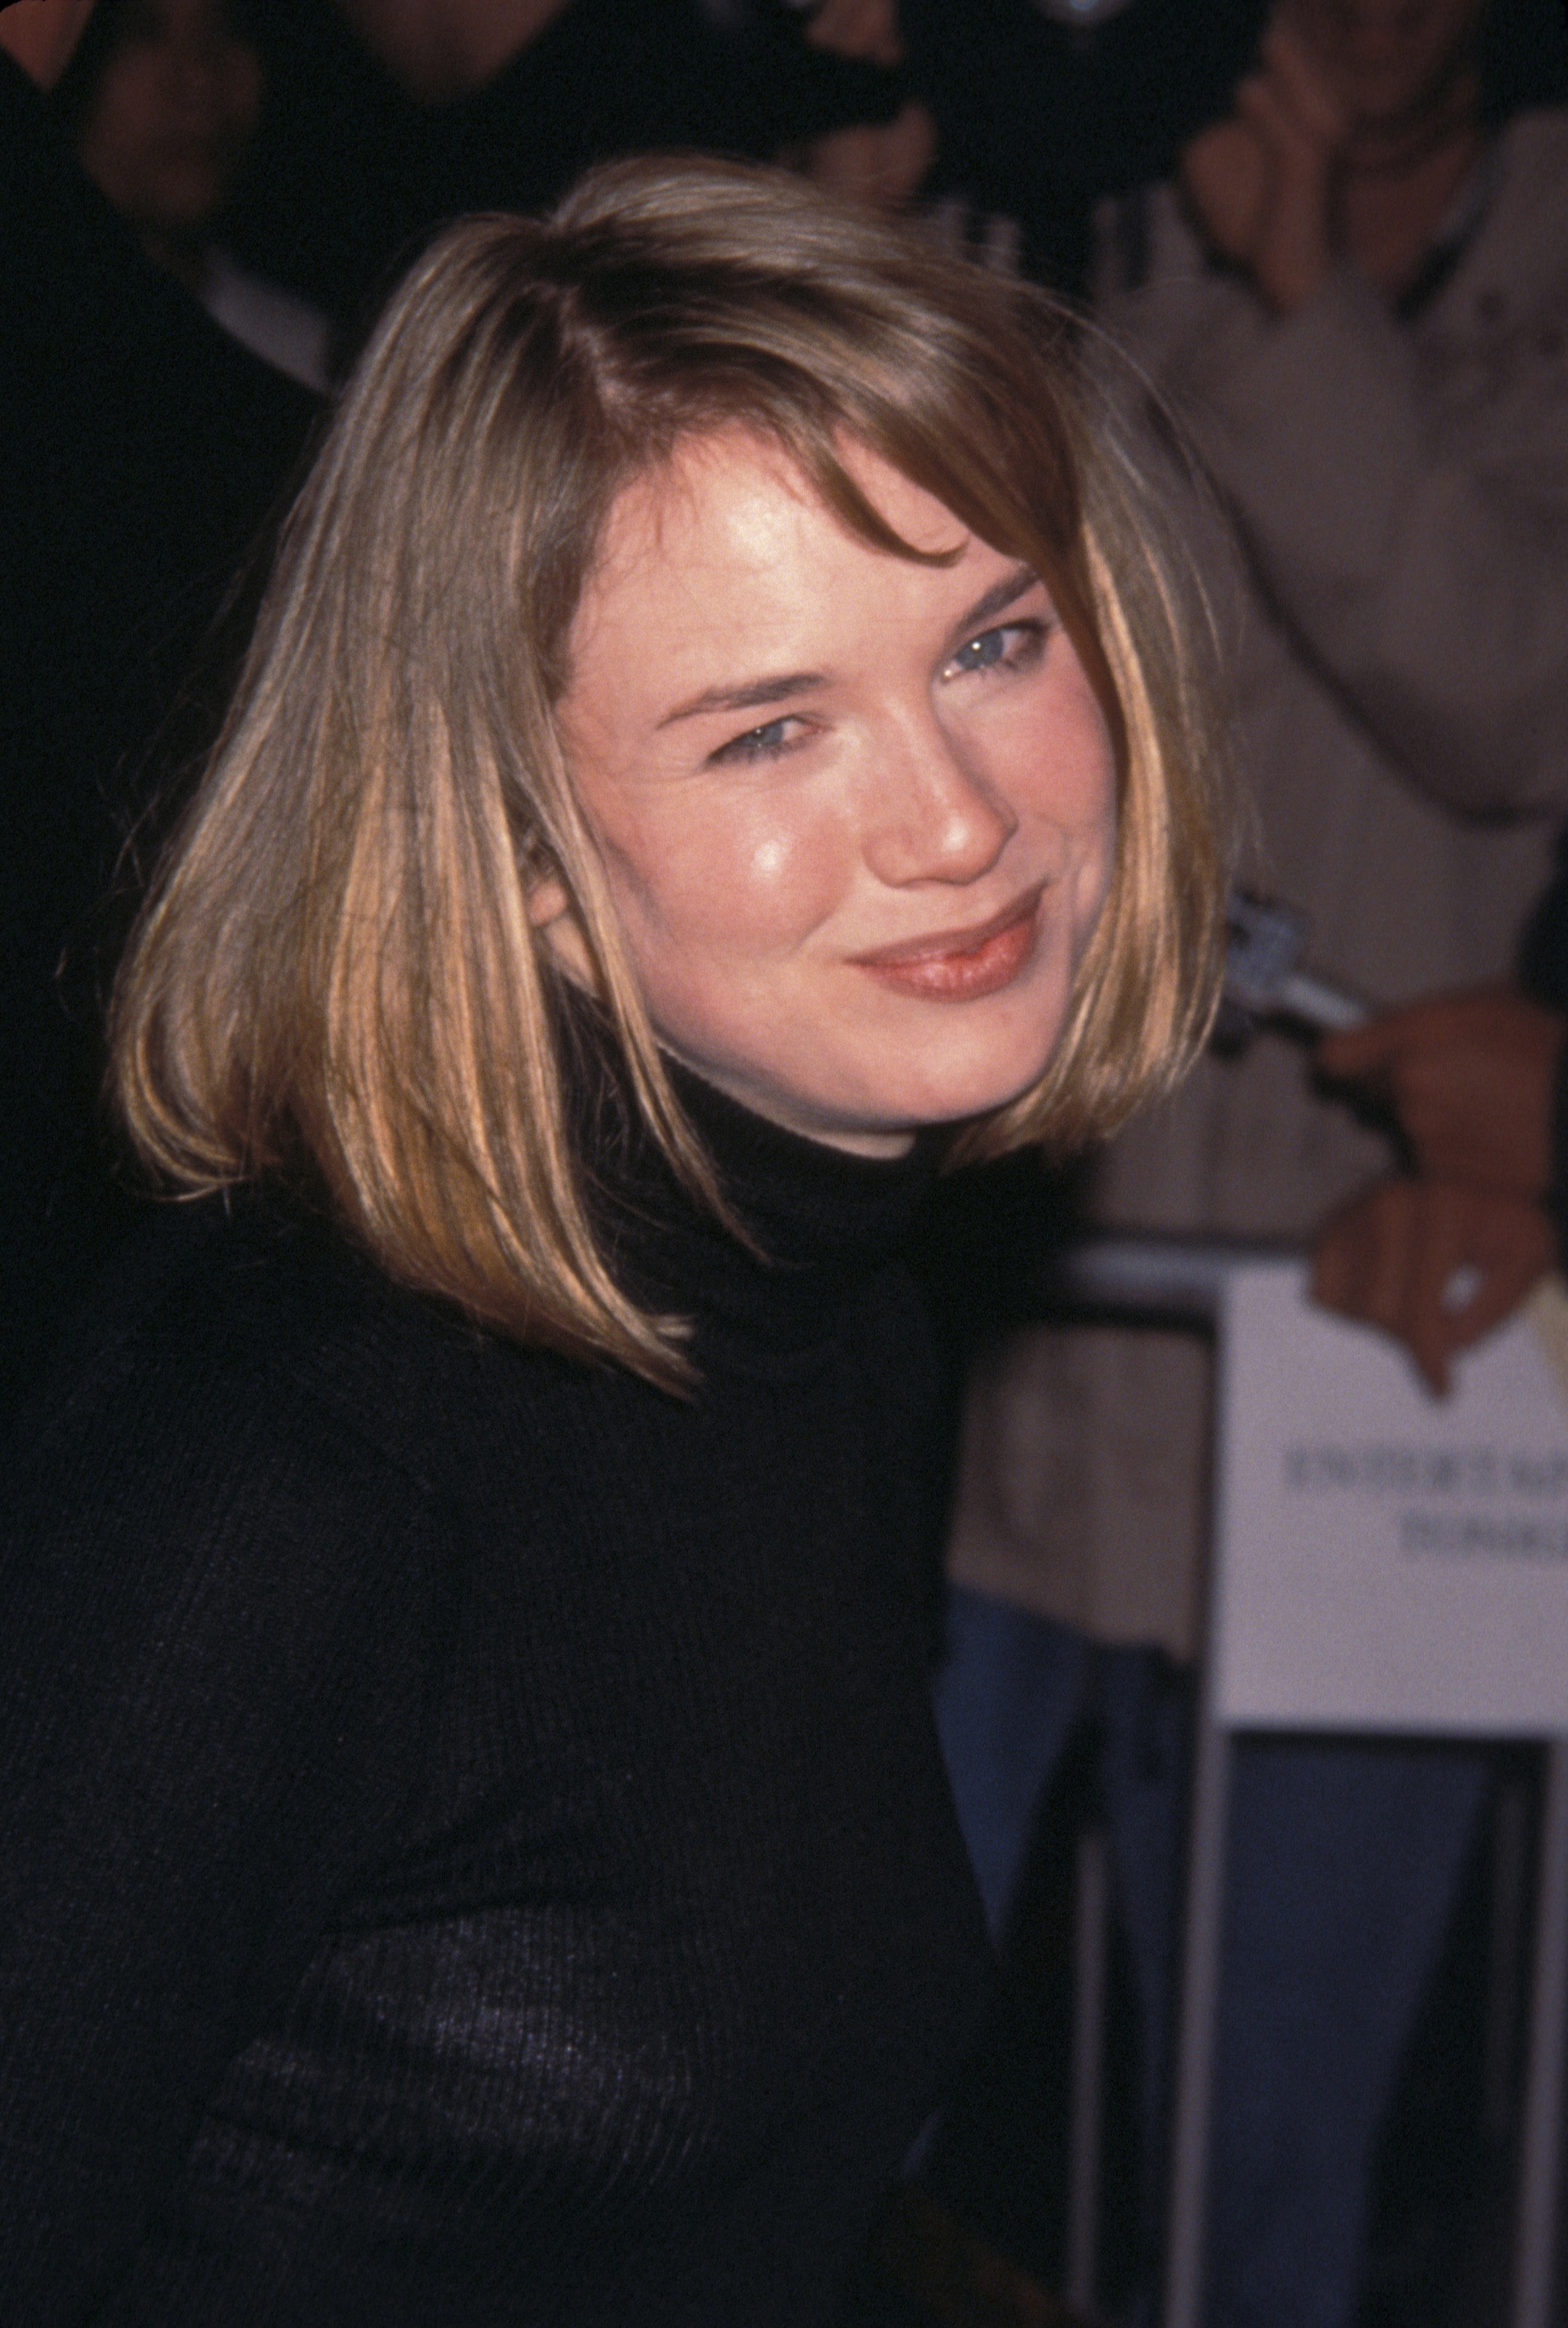 Renée Zellweger at the Jerry Maguire premiere at the Mann Village Theatre in Los Angeles, California